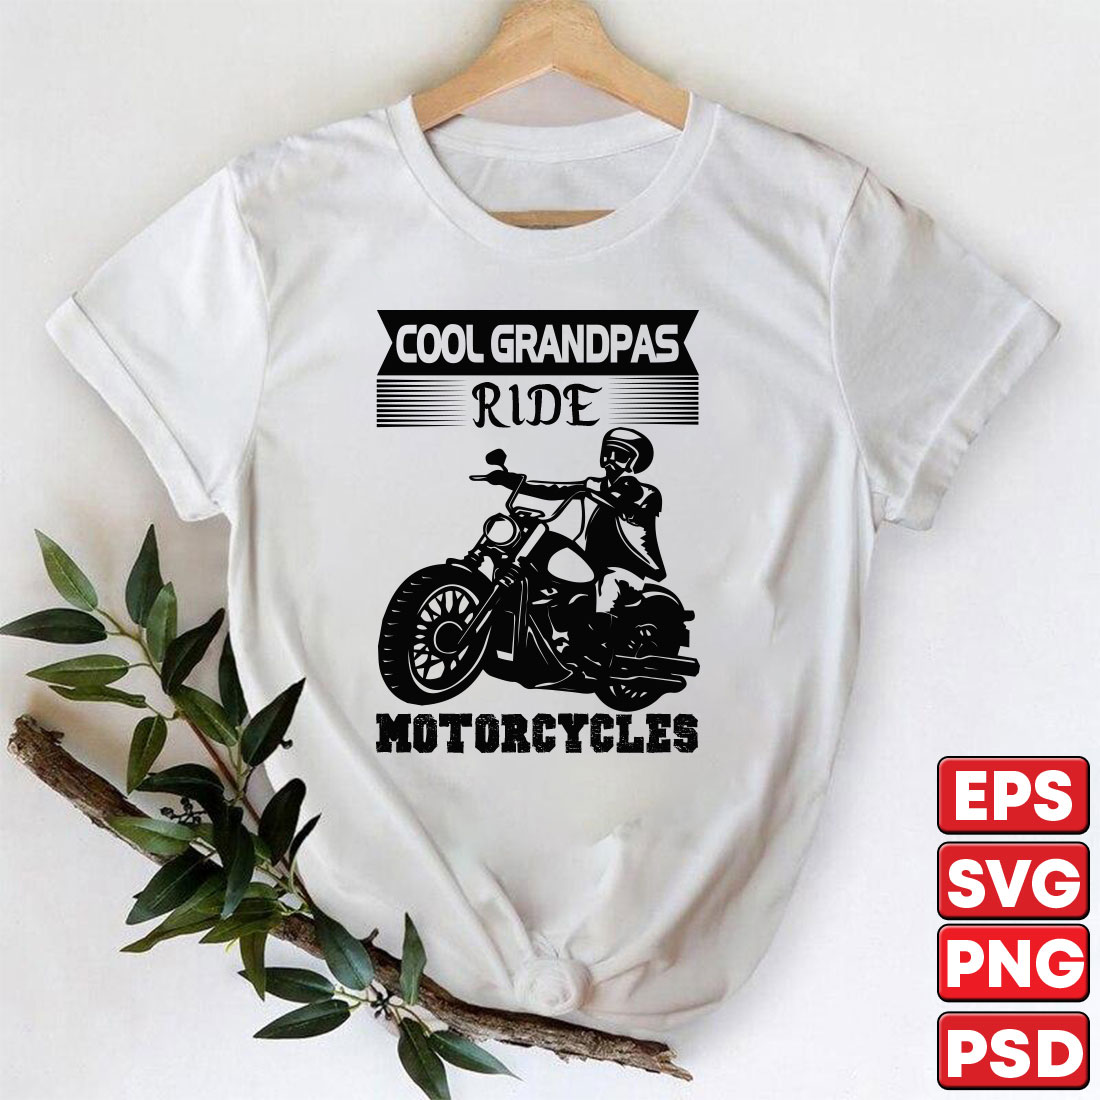 Cool Grandpas Ride Motorcycles cover image.